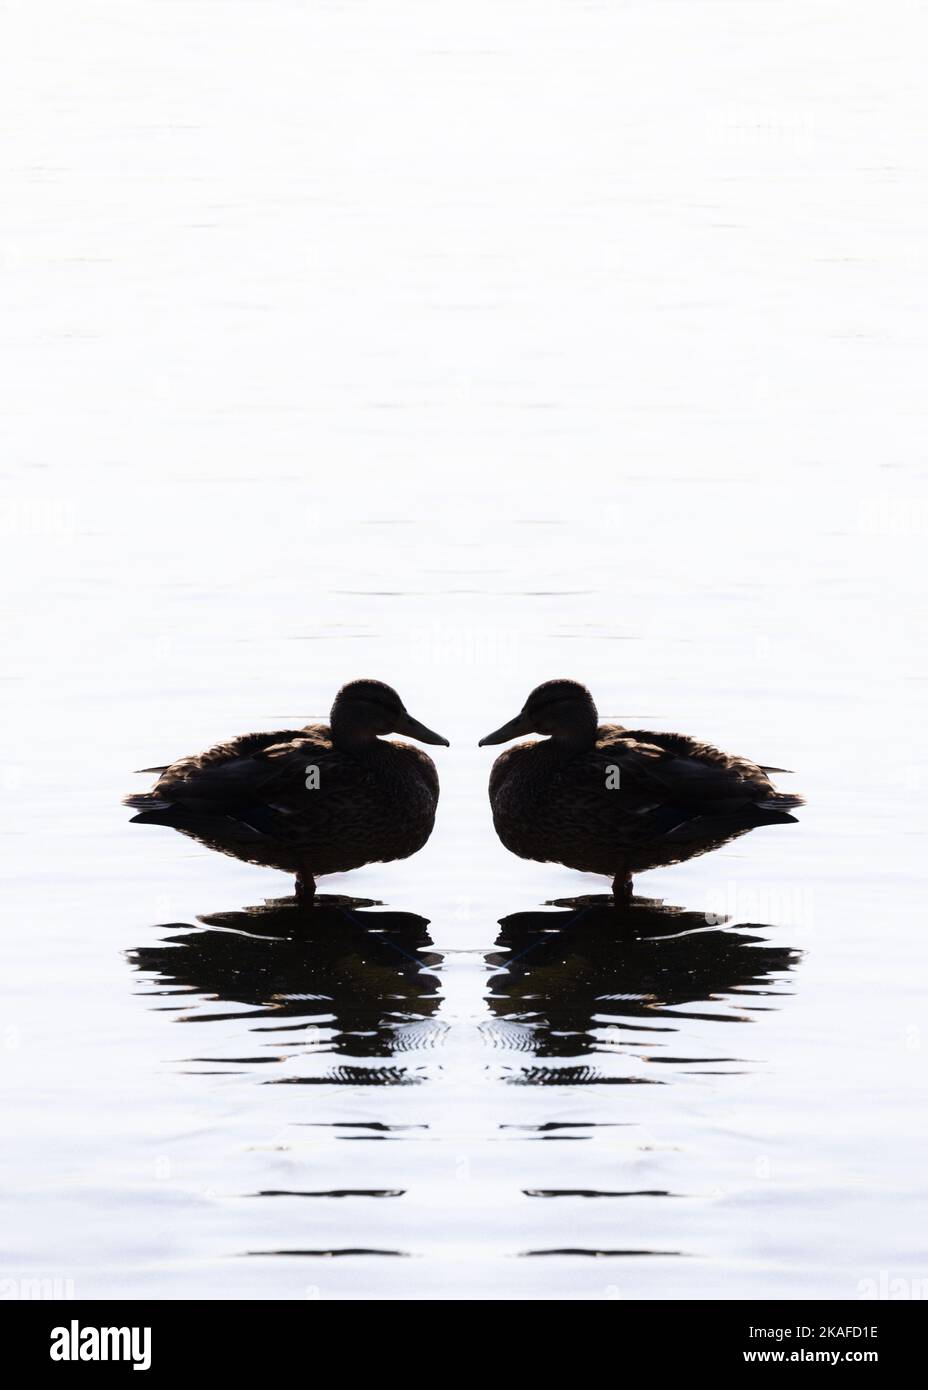 two ducks in the water silhouettes Stock Photo